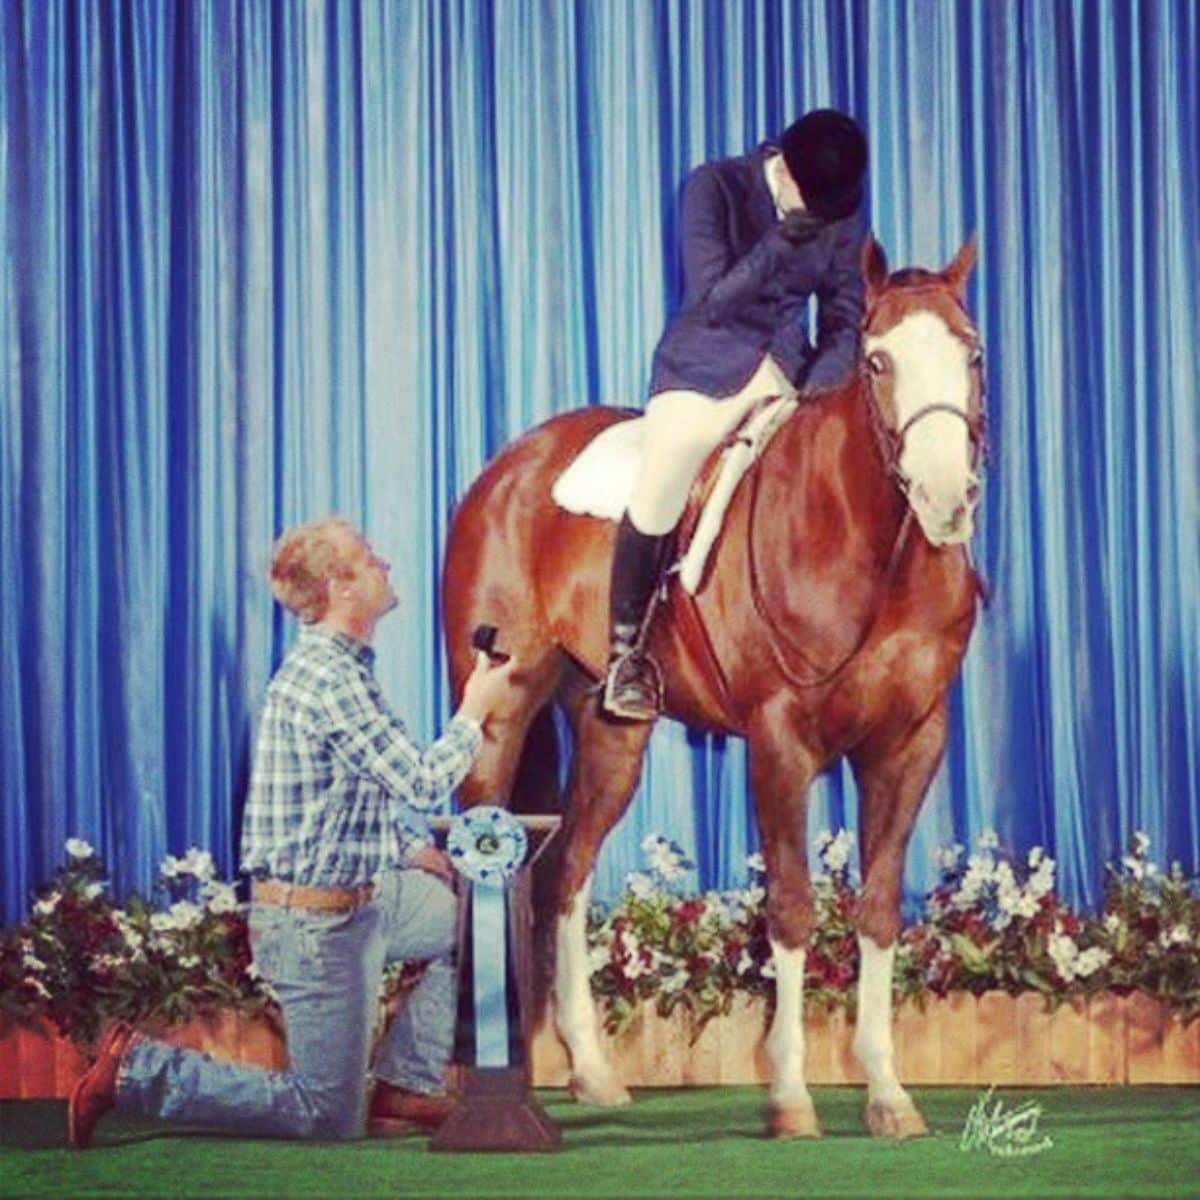 A man proposing to her fiance sitting on a brown horse.